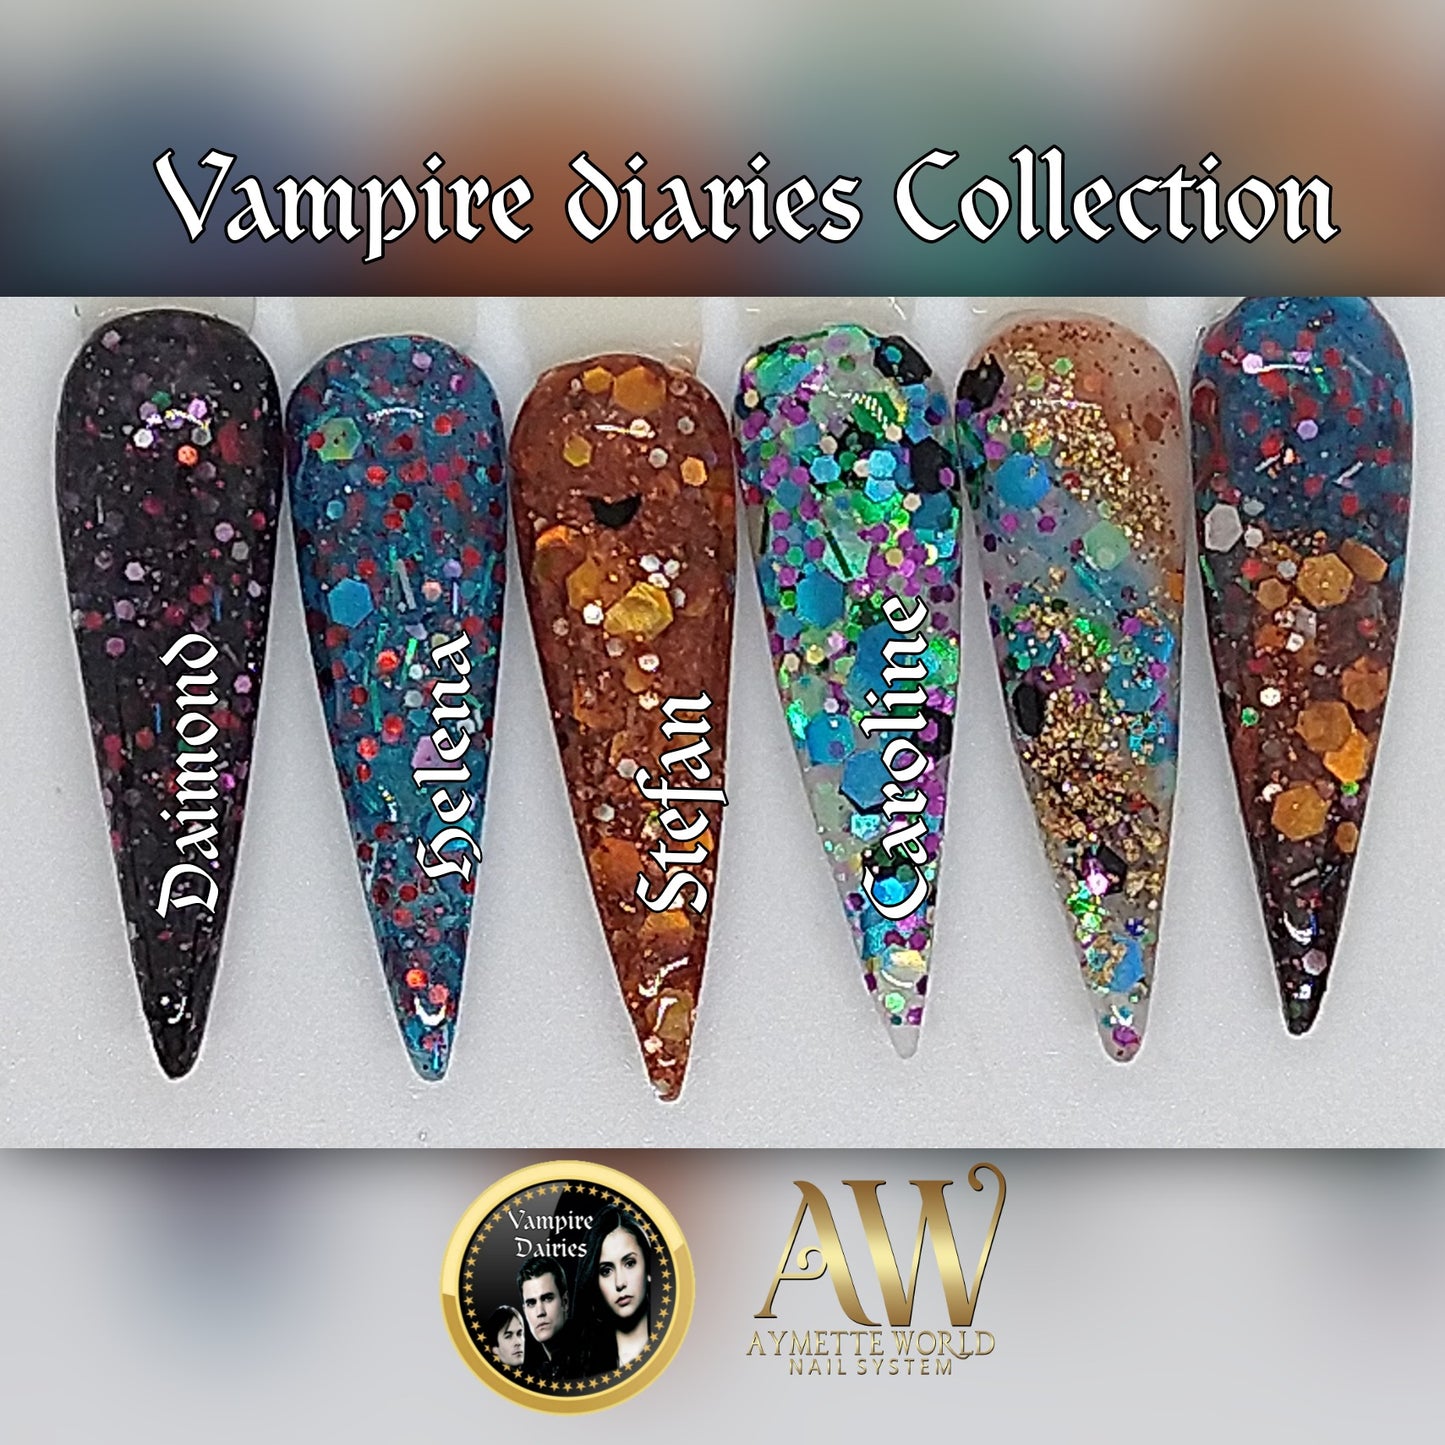 Vampire 🦇 diaries Collection 10g